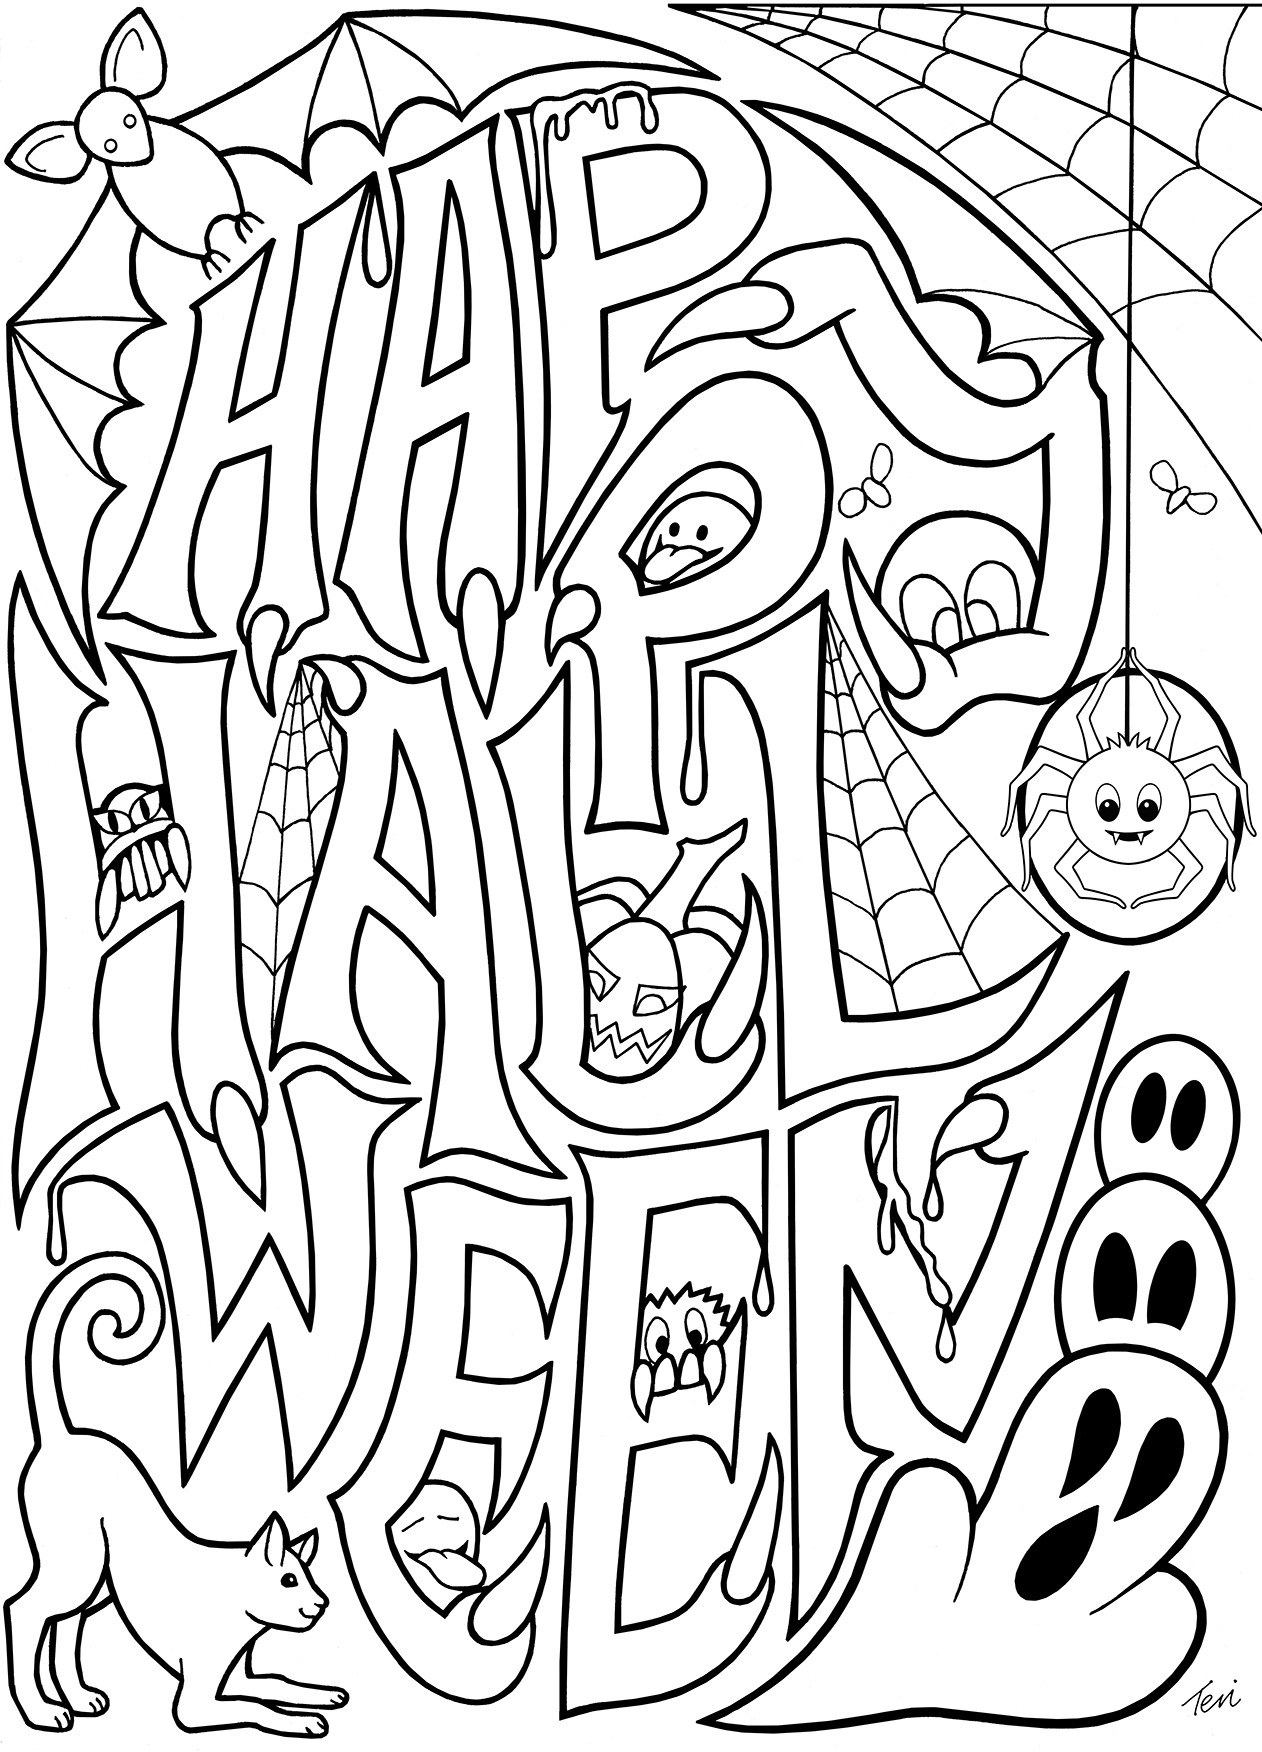 Coloring Pages For Halloween Printable
 Free Adult Coloring Book Pages Happy Halloween by Blue